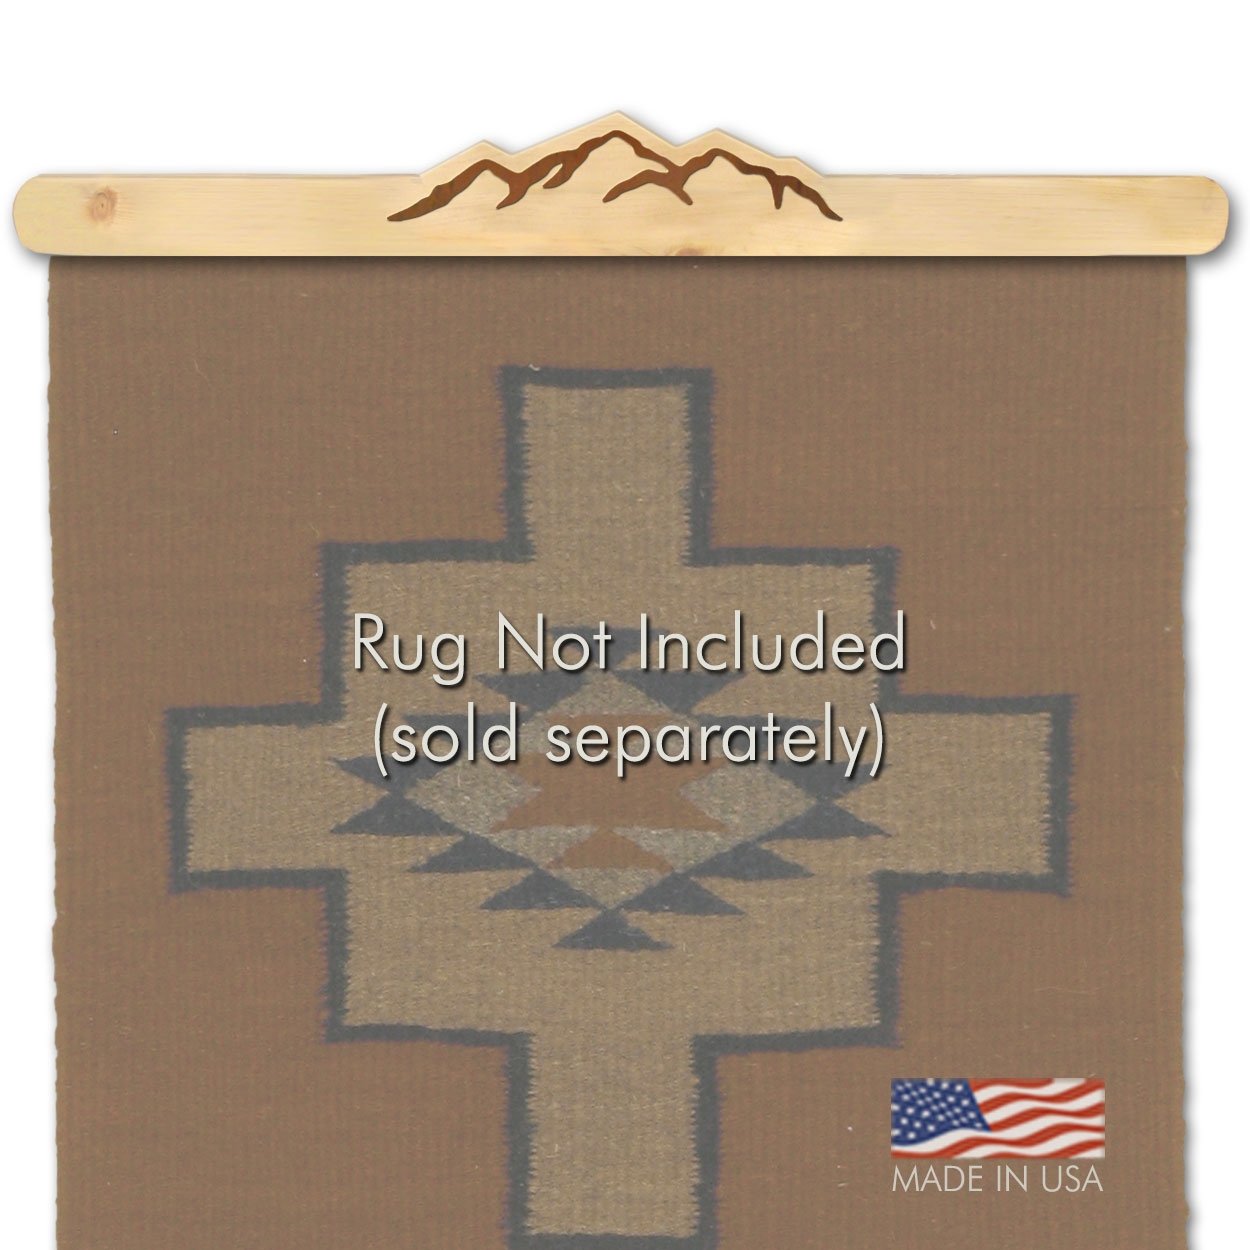 4910 - Mountain Silhouette Natural Pine Wooden Rug Hanger with Rust Metal Accent